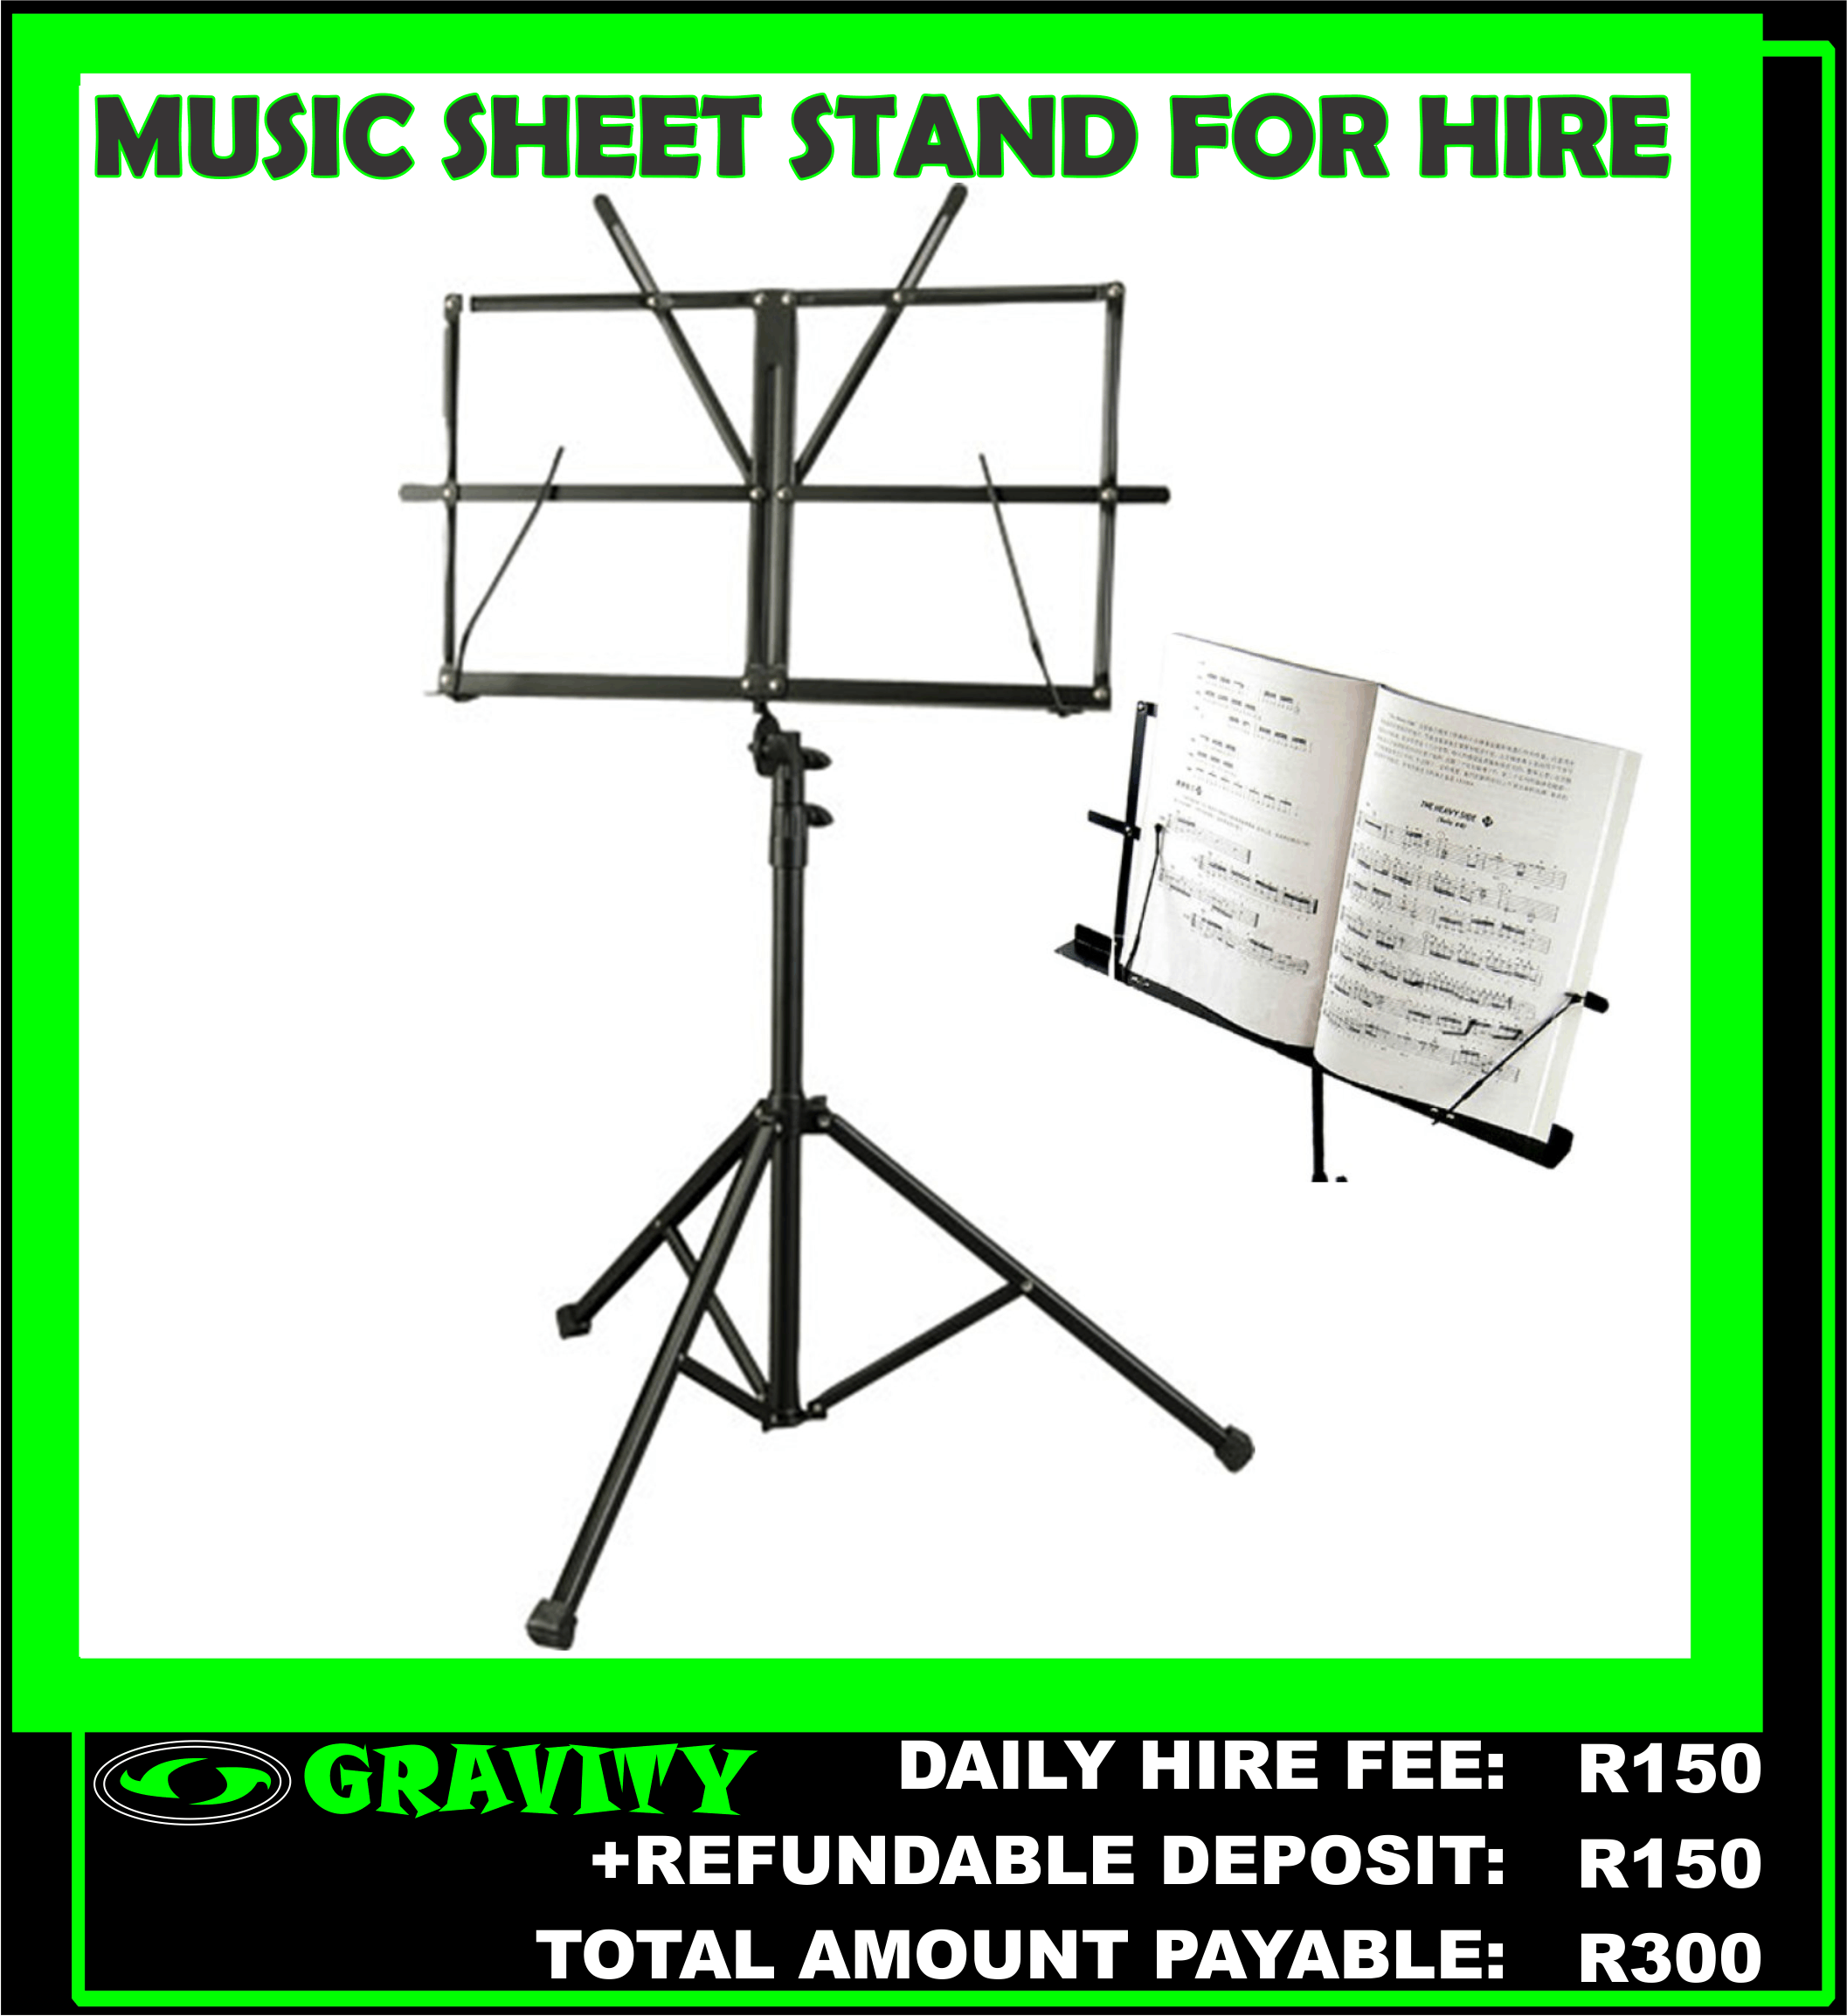 MUSIC SHEET STAND FOR HIRE DURBAN